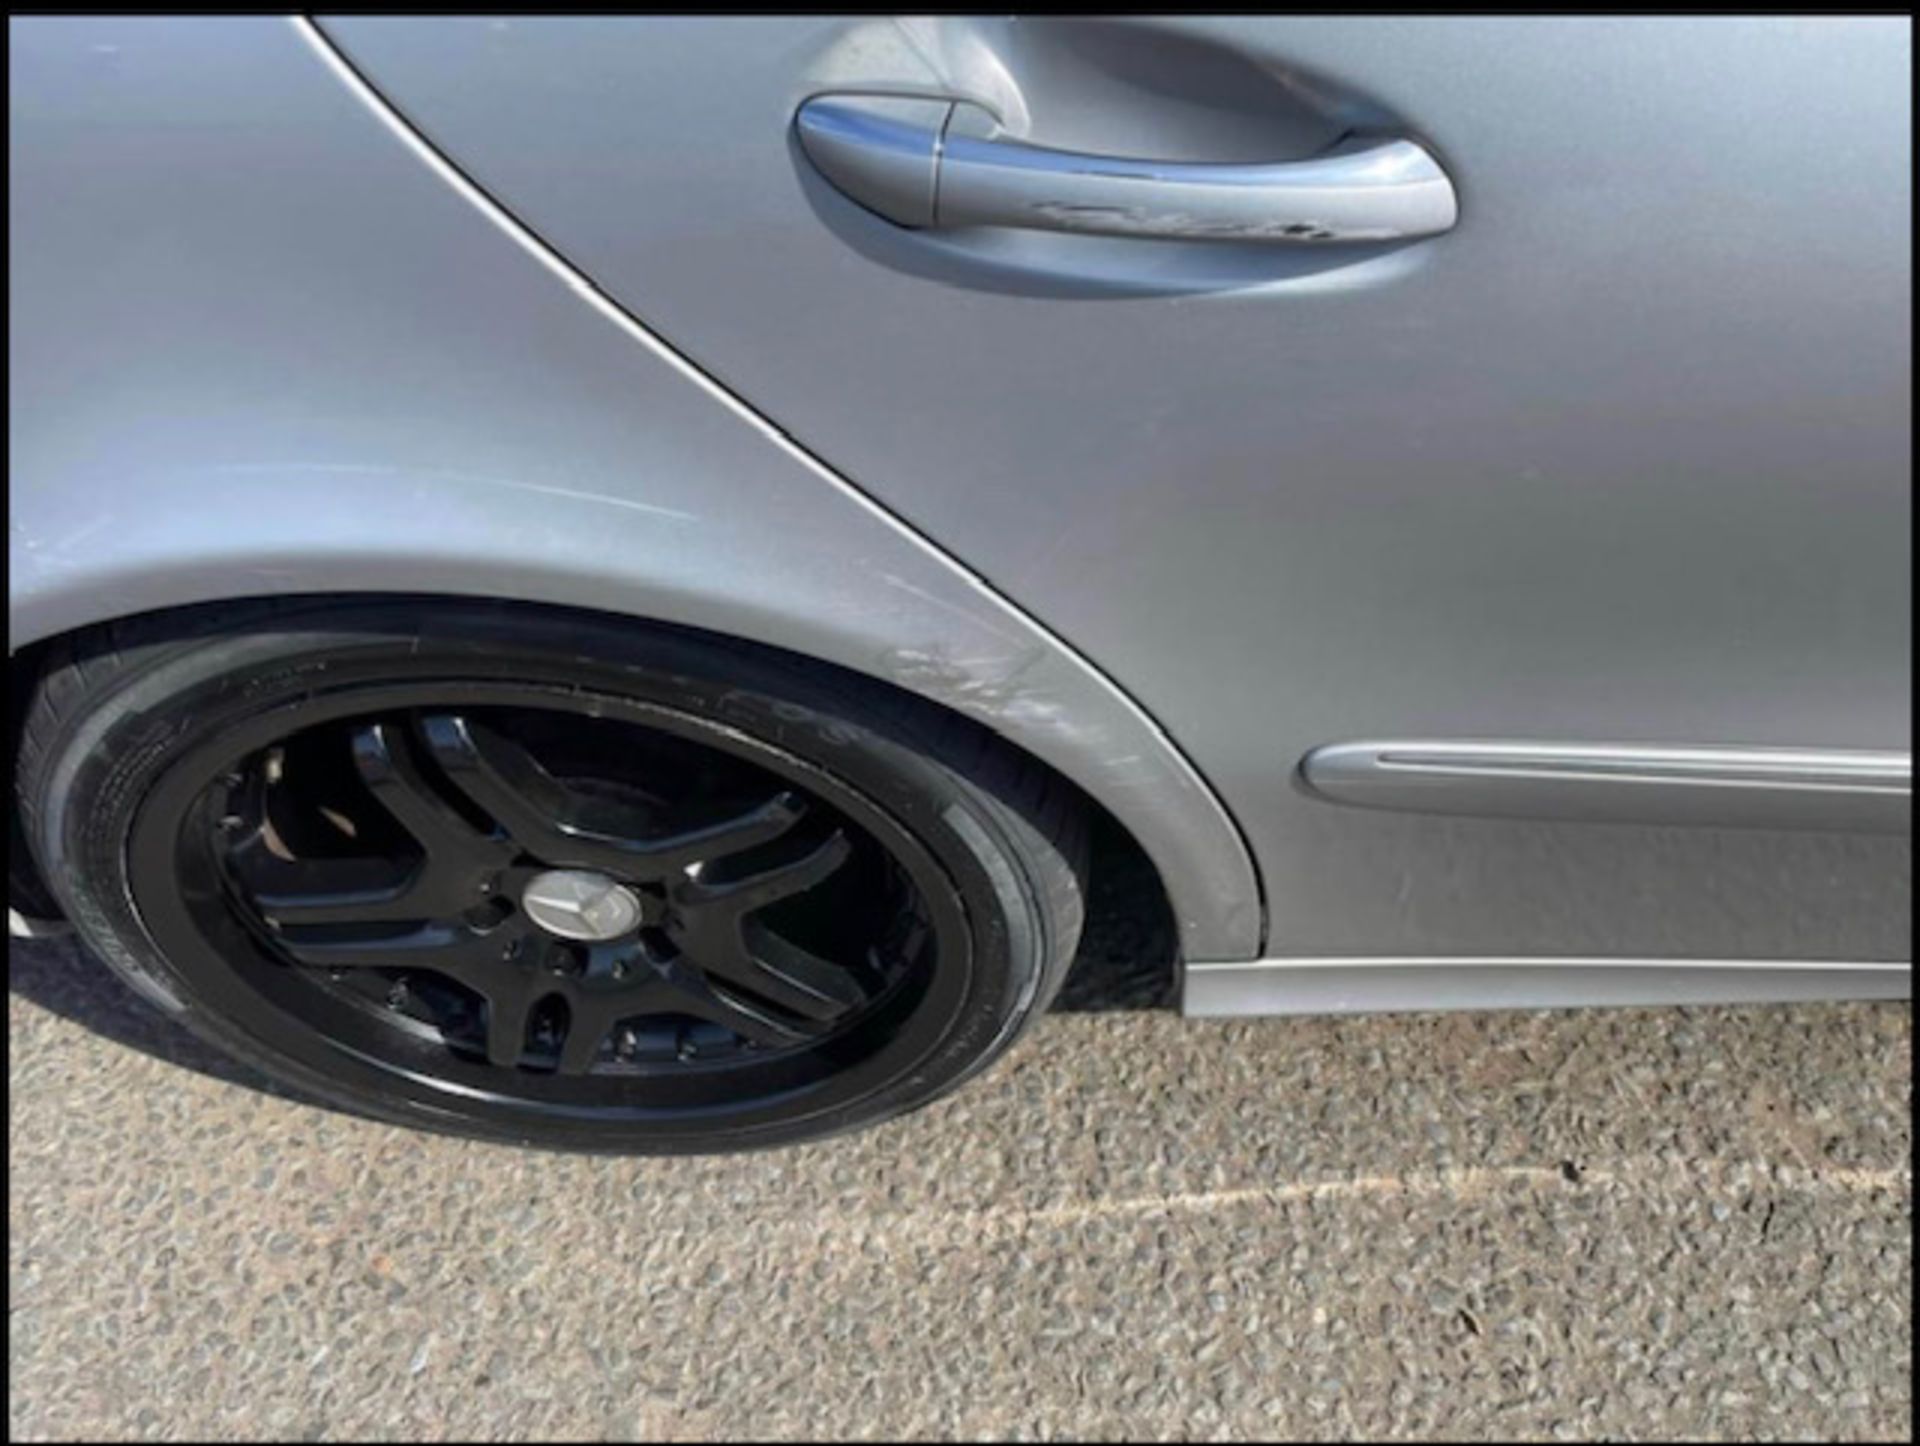 Mercedes E320 CDI 103k genuine miles ,as per pictures has scratches as shown in photos but is all in - Image 10 of 14